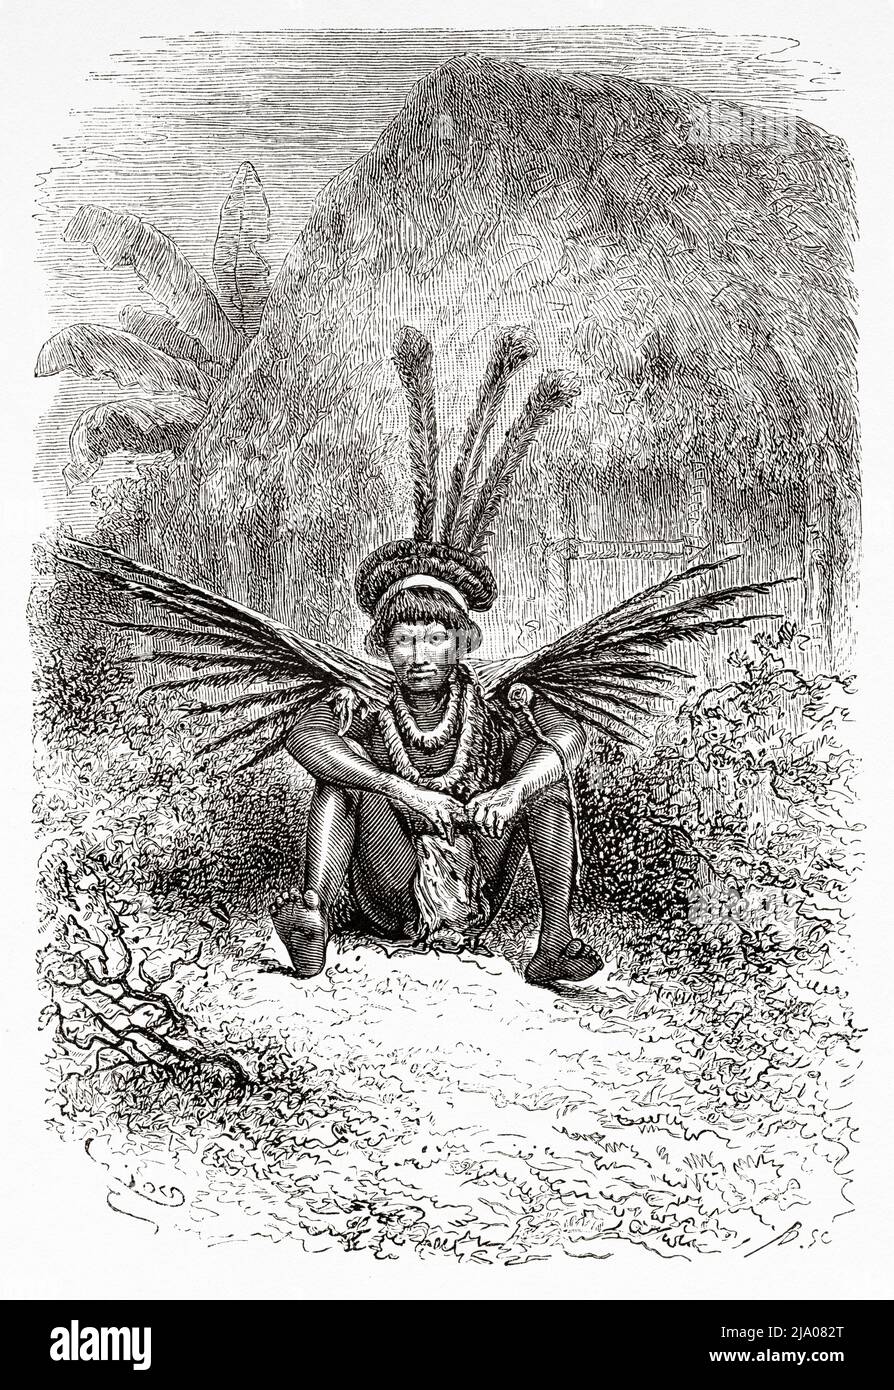 Indigenous native of the native indigenous Wayana Indians tribe, French Guiana, Department of France, South America. Voyage of exploration in the interior of the Guianas 1877 by Jules Crevaux. Le Tour du Monde 1879 Stock Photo